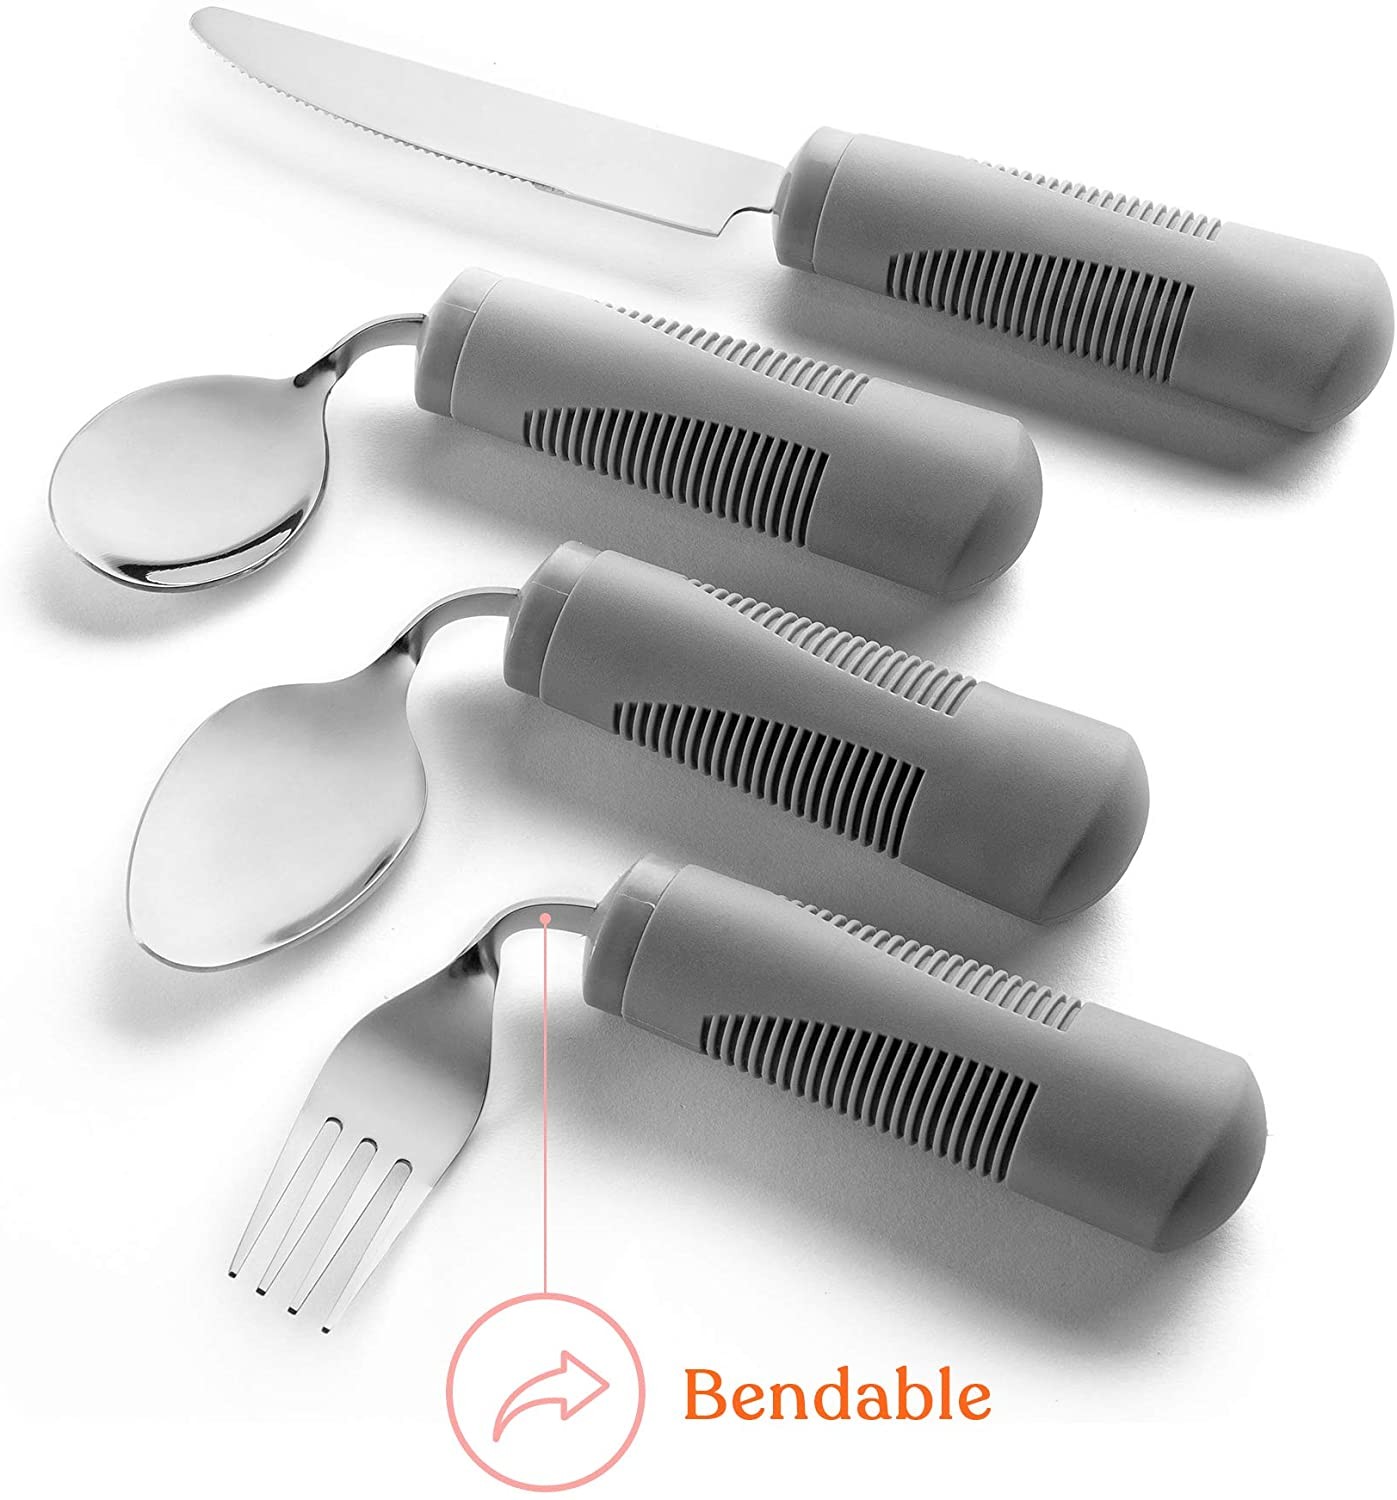 Big-Grip Bendable Weighted Utensils Set of 3:: bendable eating